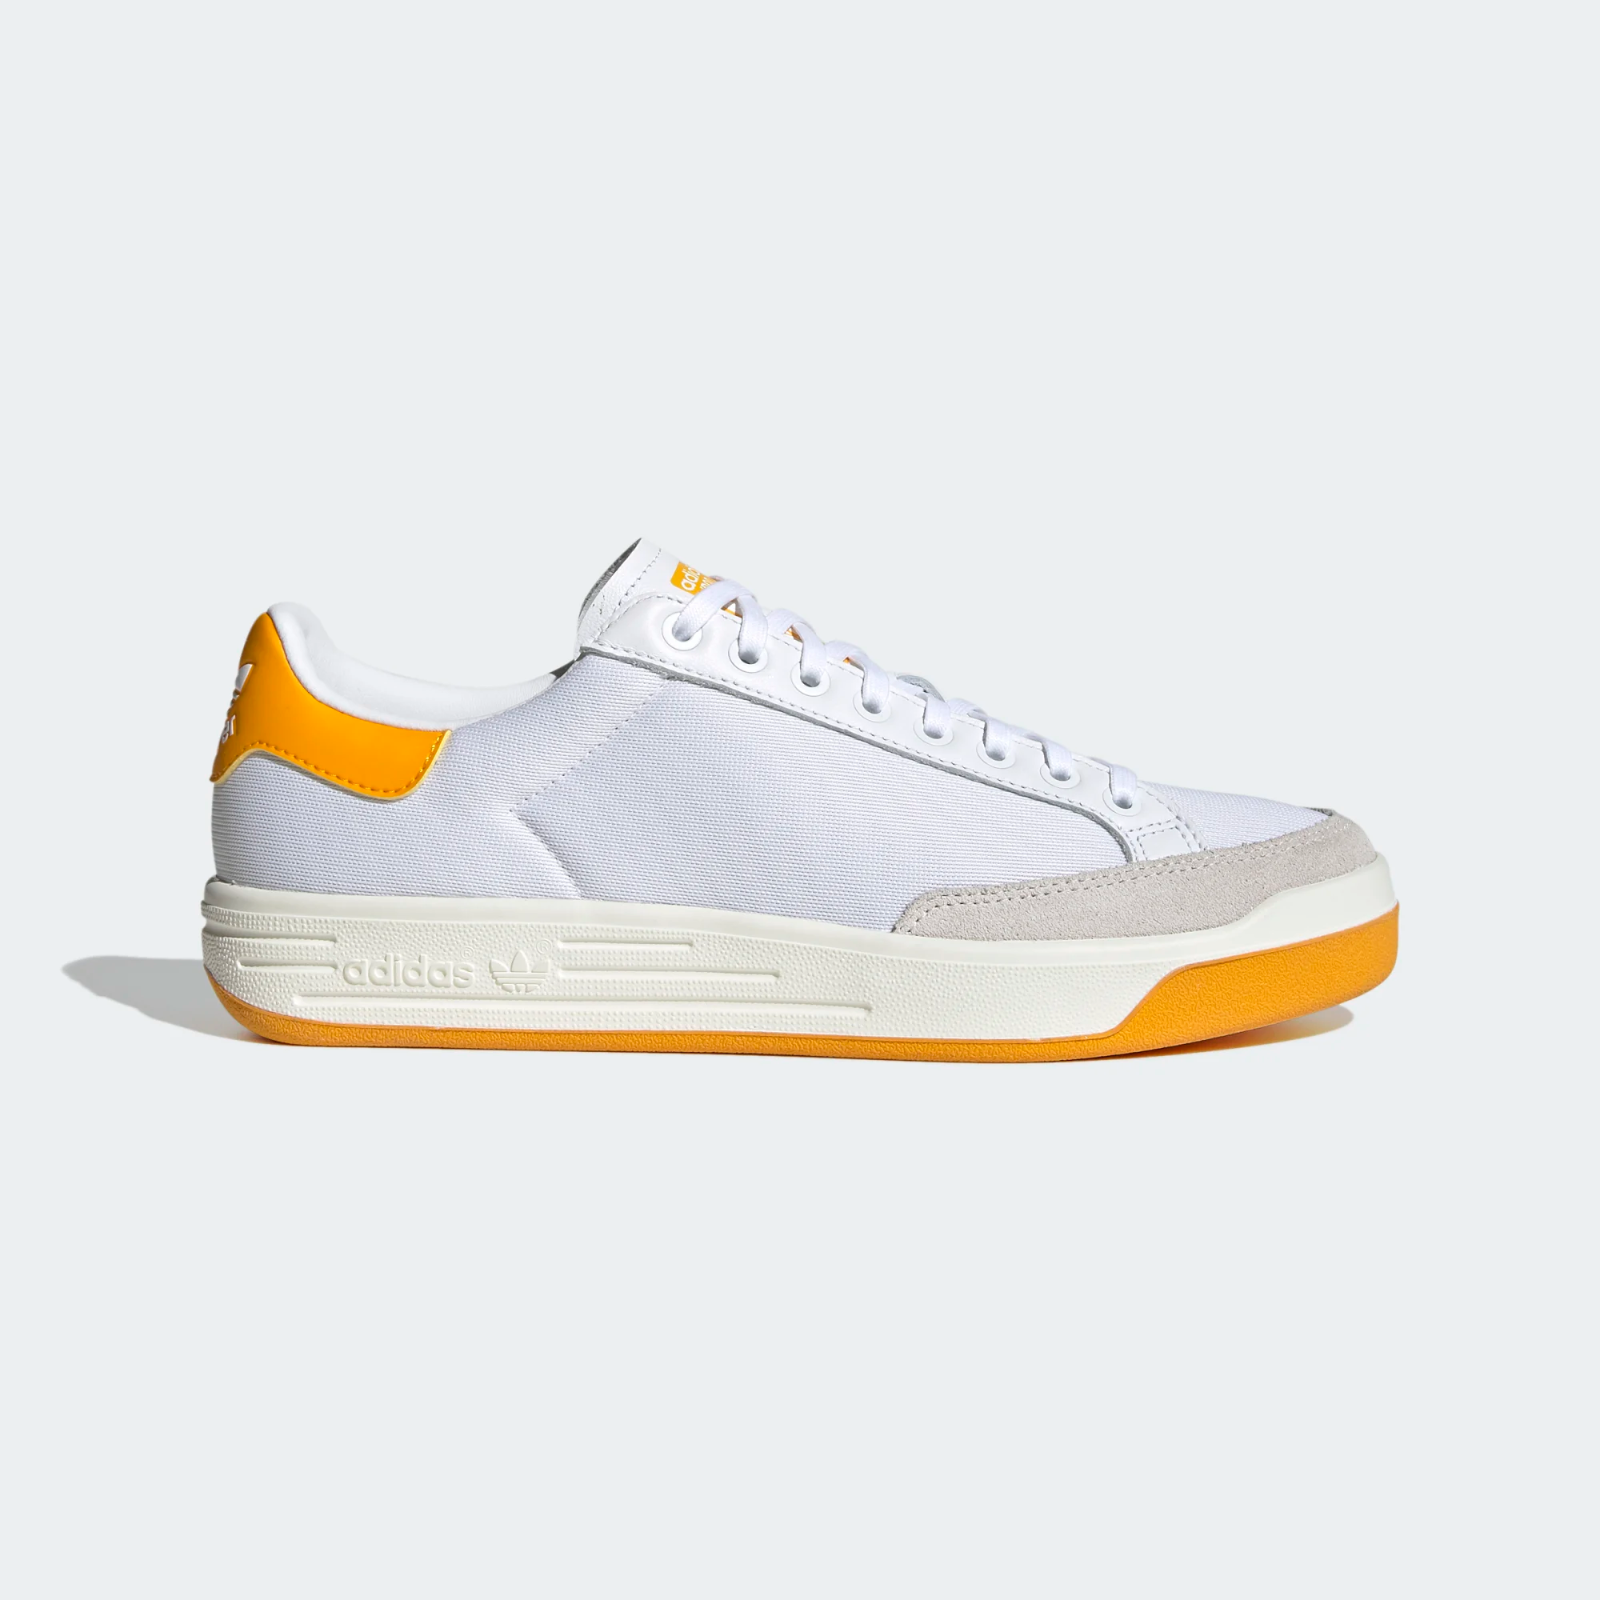 Adidas Originals Rod Laver a Modern Legend Trainers in White and Gold